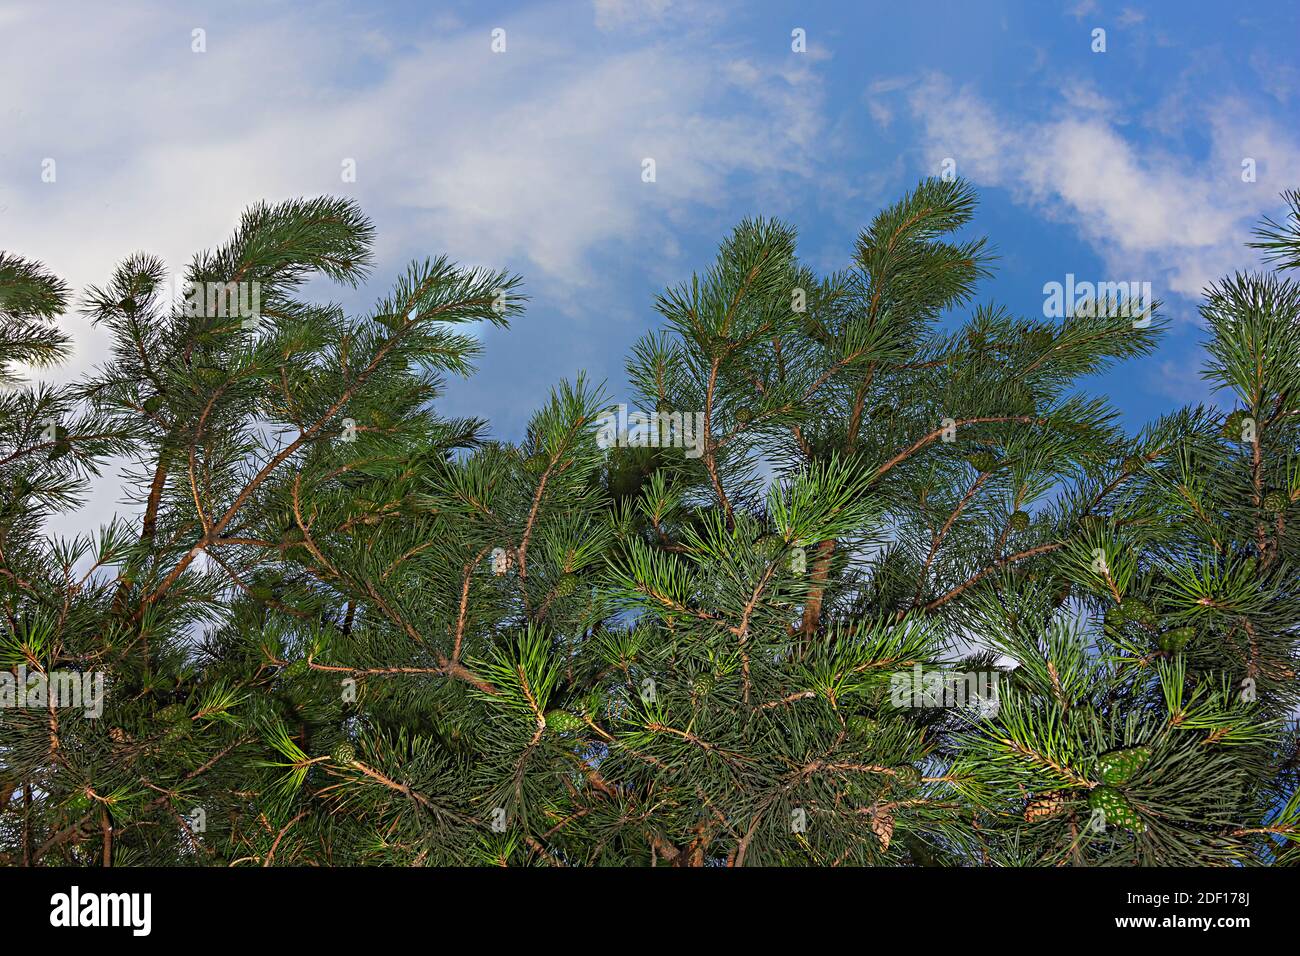 Pine tree branches with pine cones and blue sky as a background Stock Photo